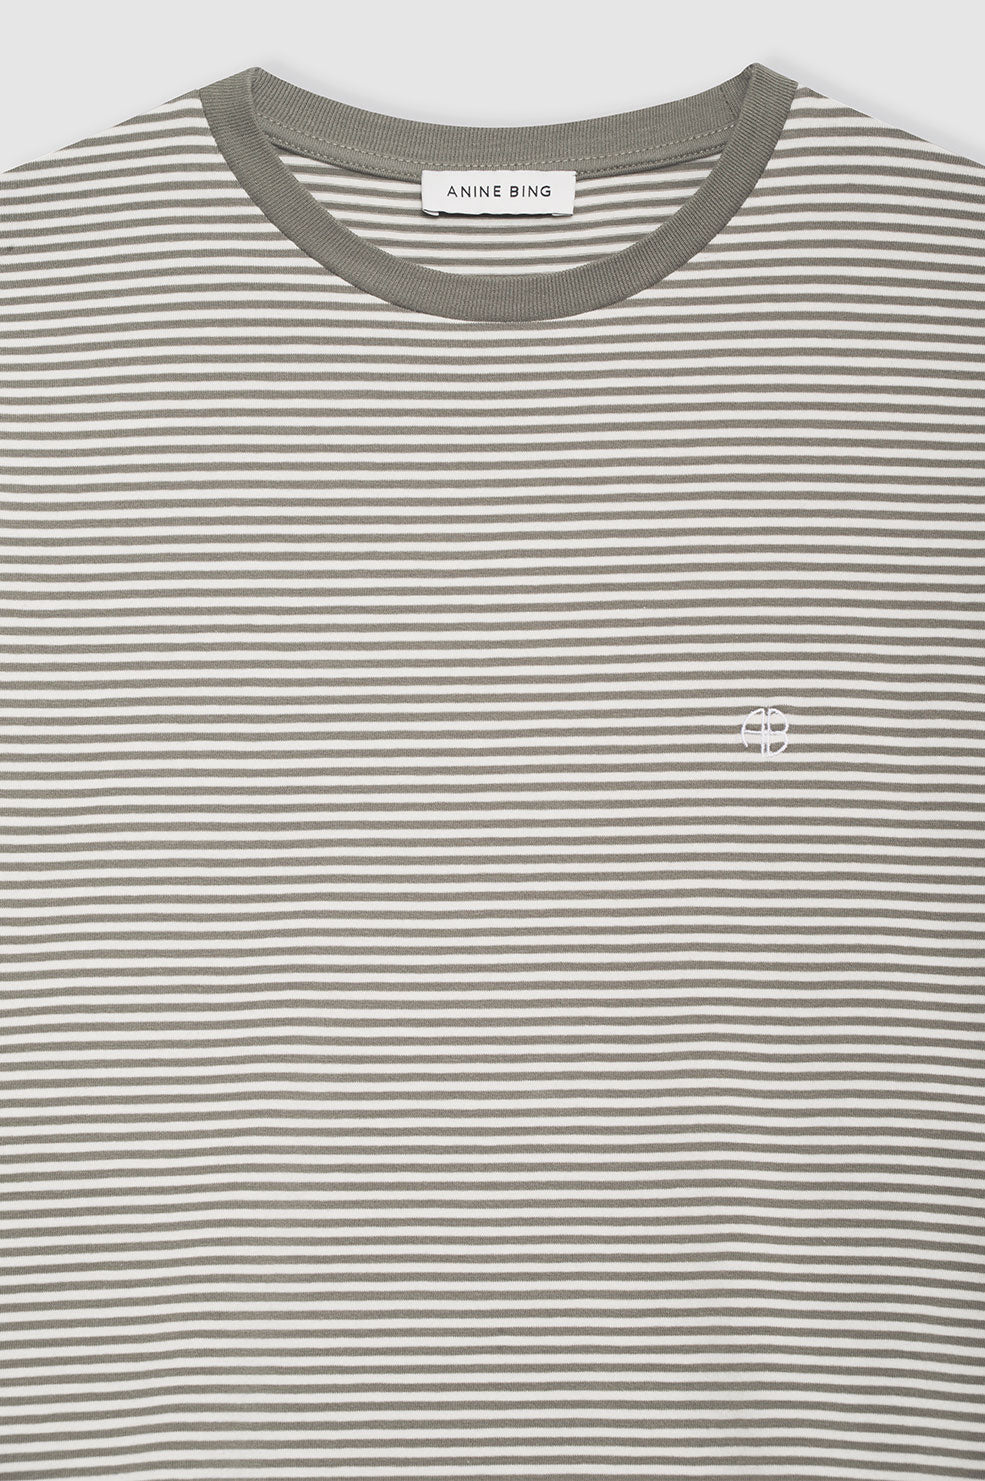 ANINE BING Bo Tee - Olive And Ivory Stripe - Detail View